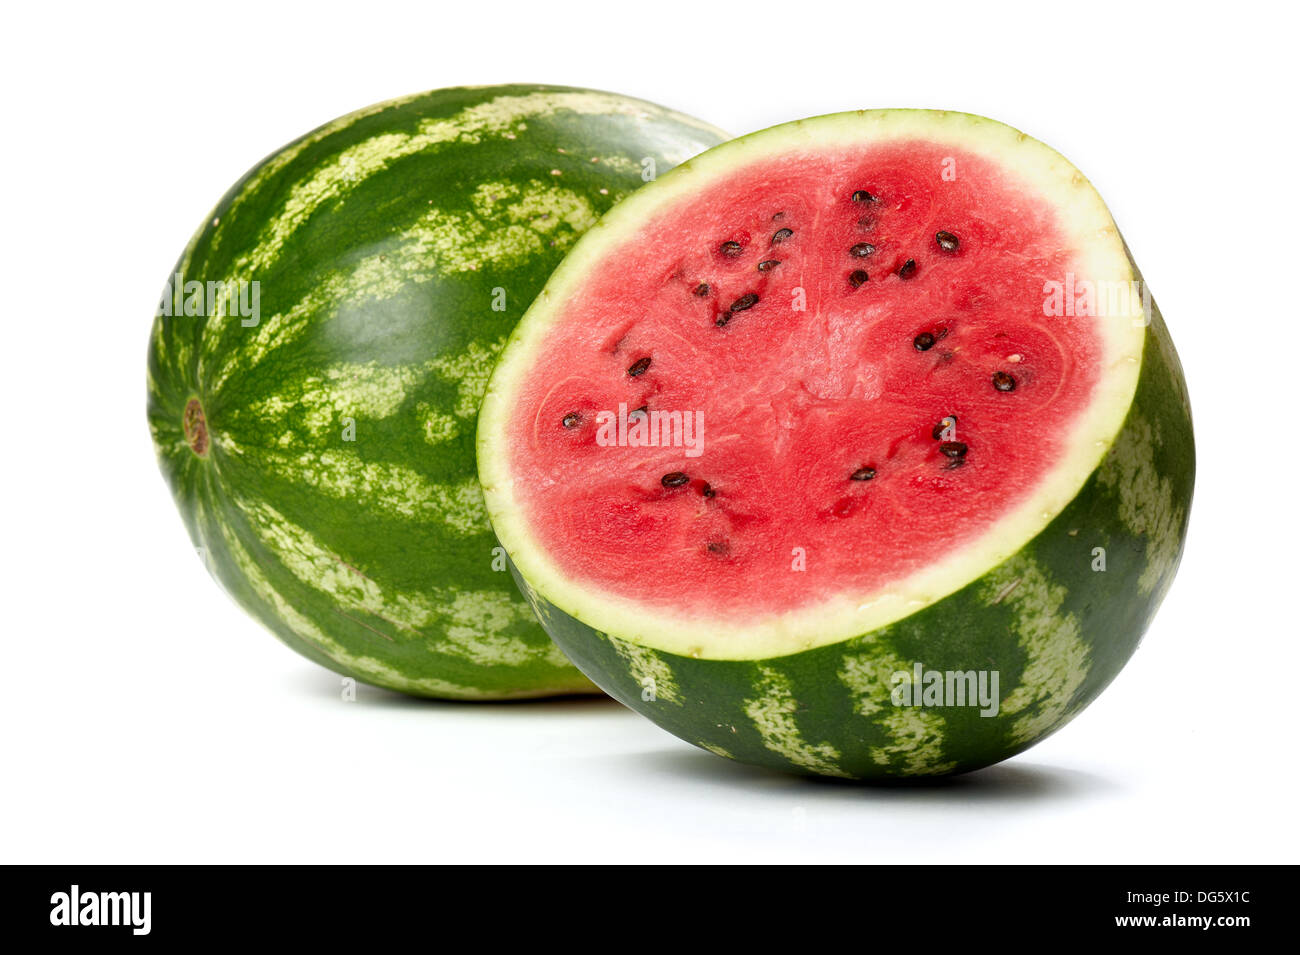 Whole and a half of watermelon on white background Stock Photo